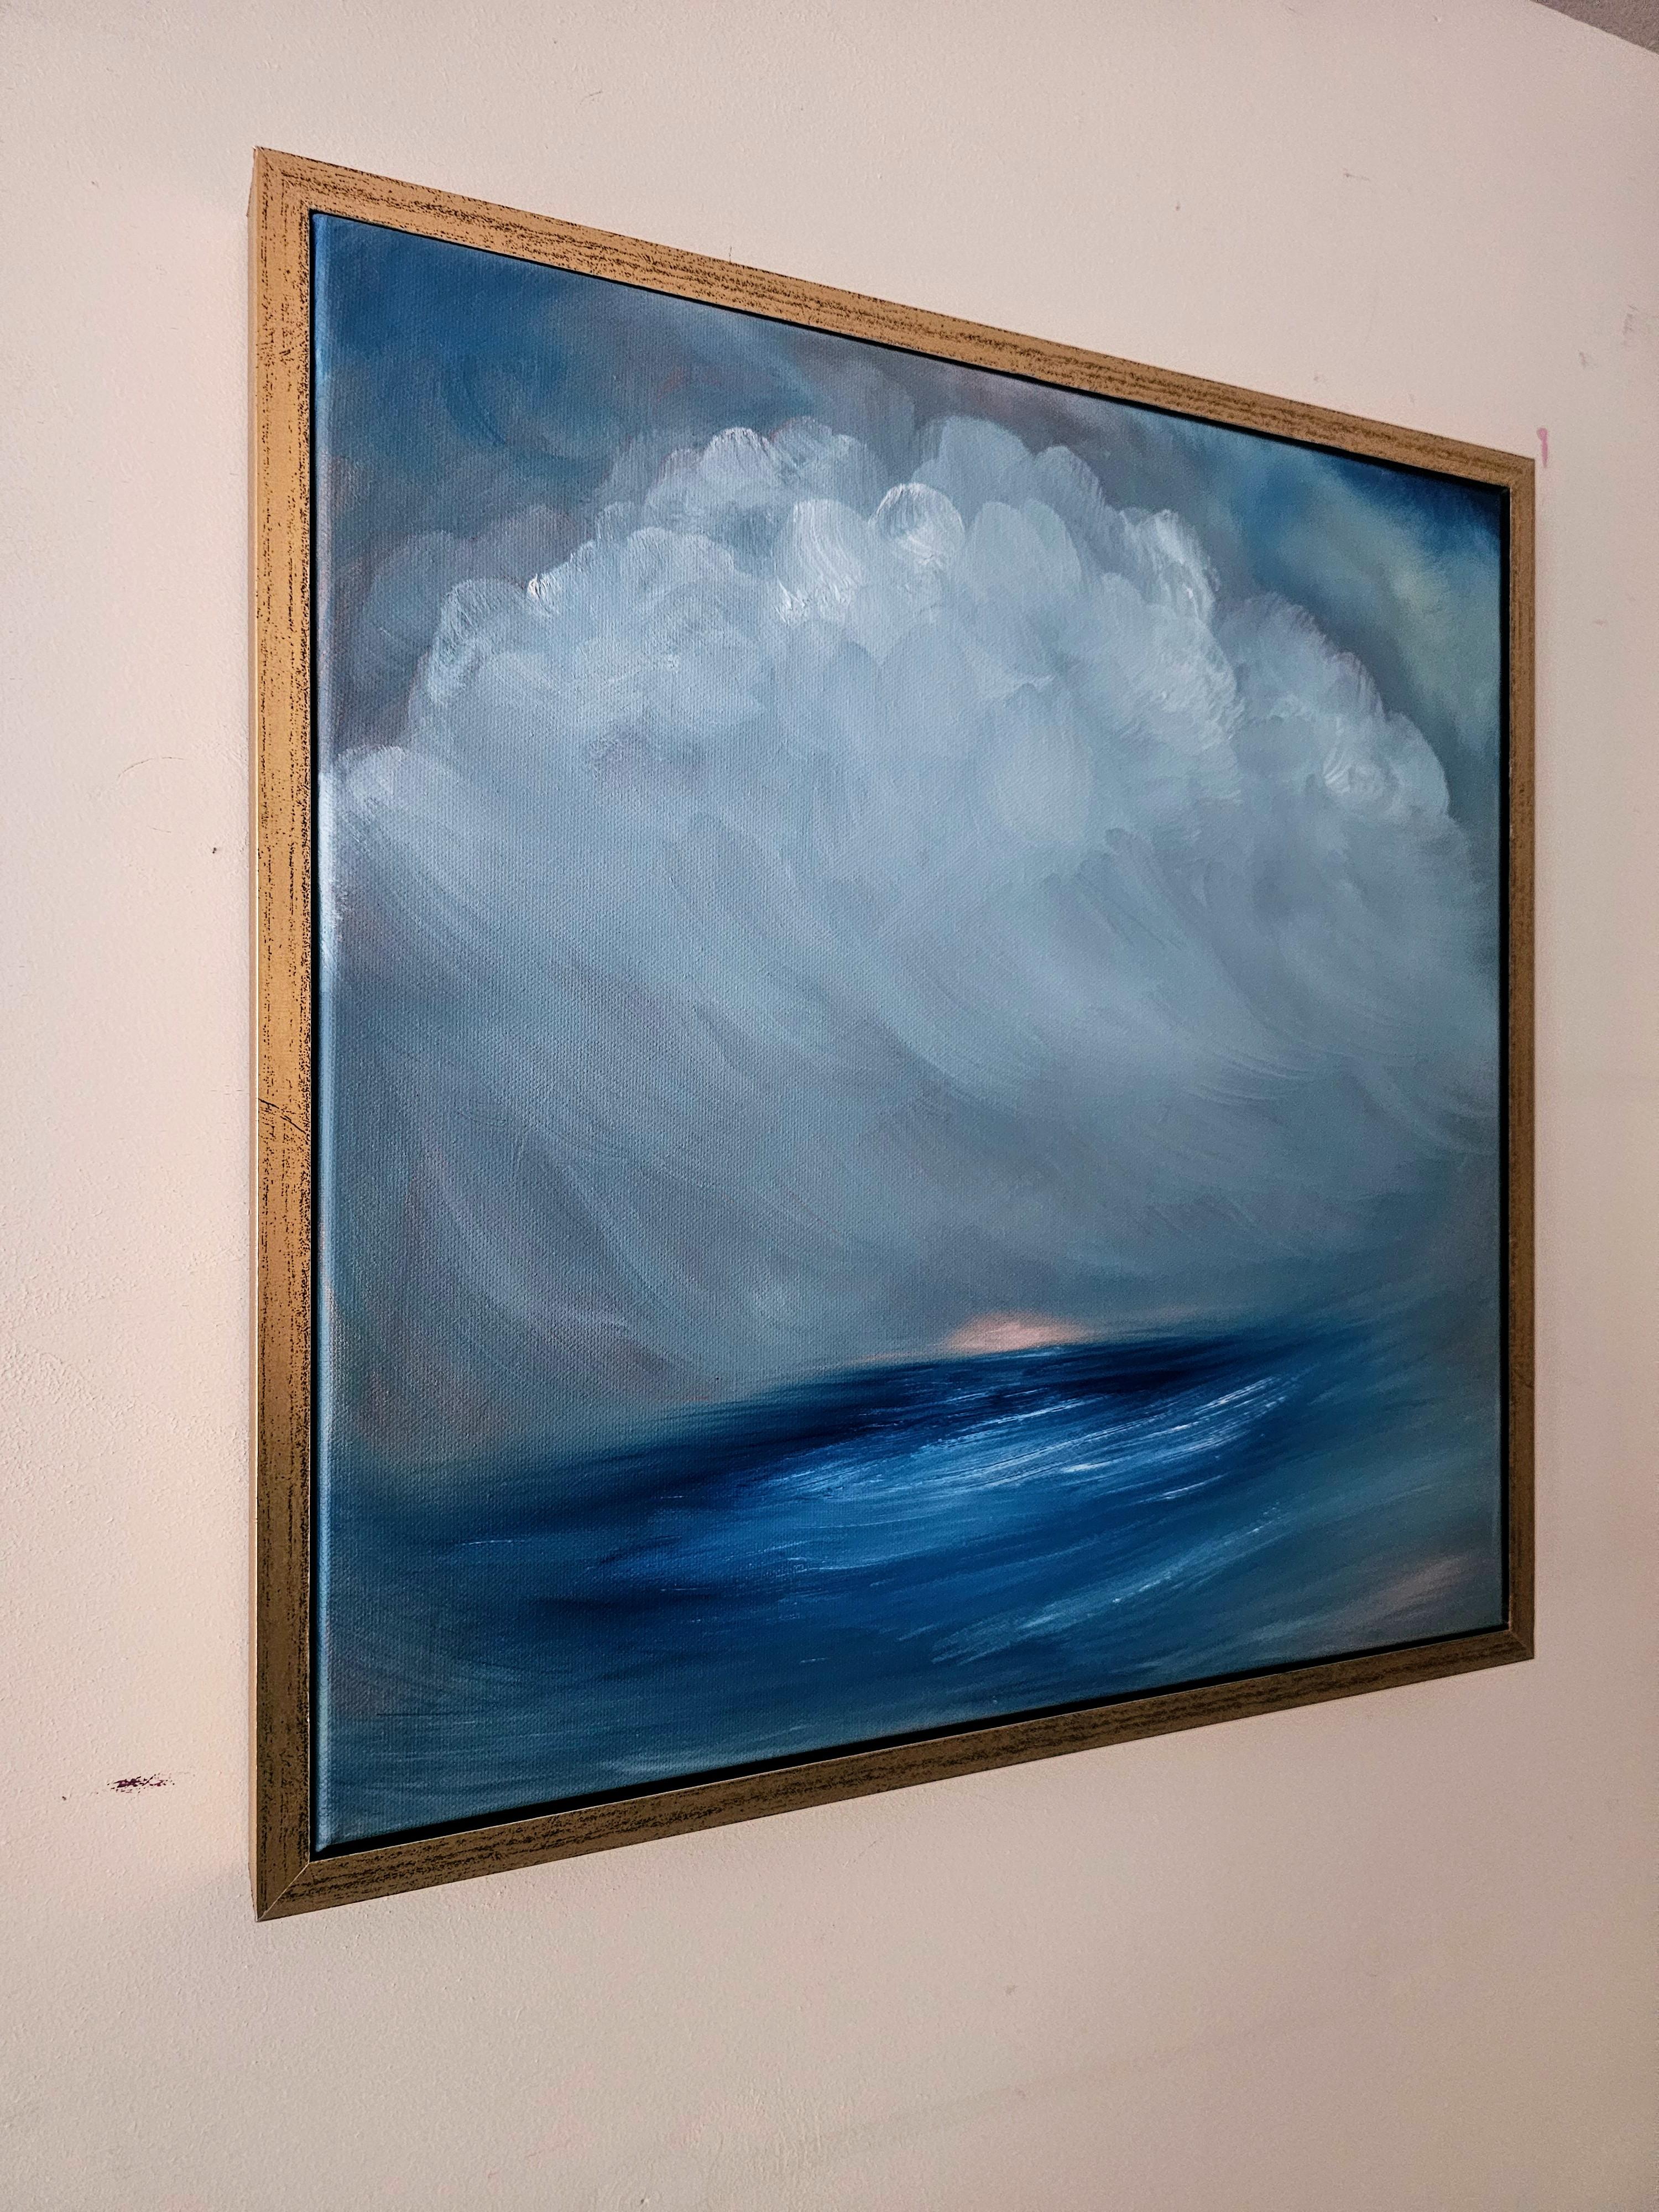 A vibrant blue abstract seascape and sky painting, 